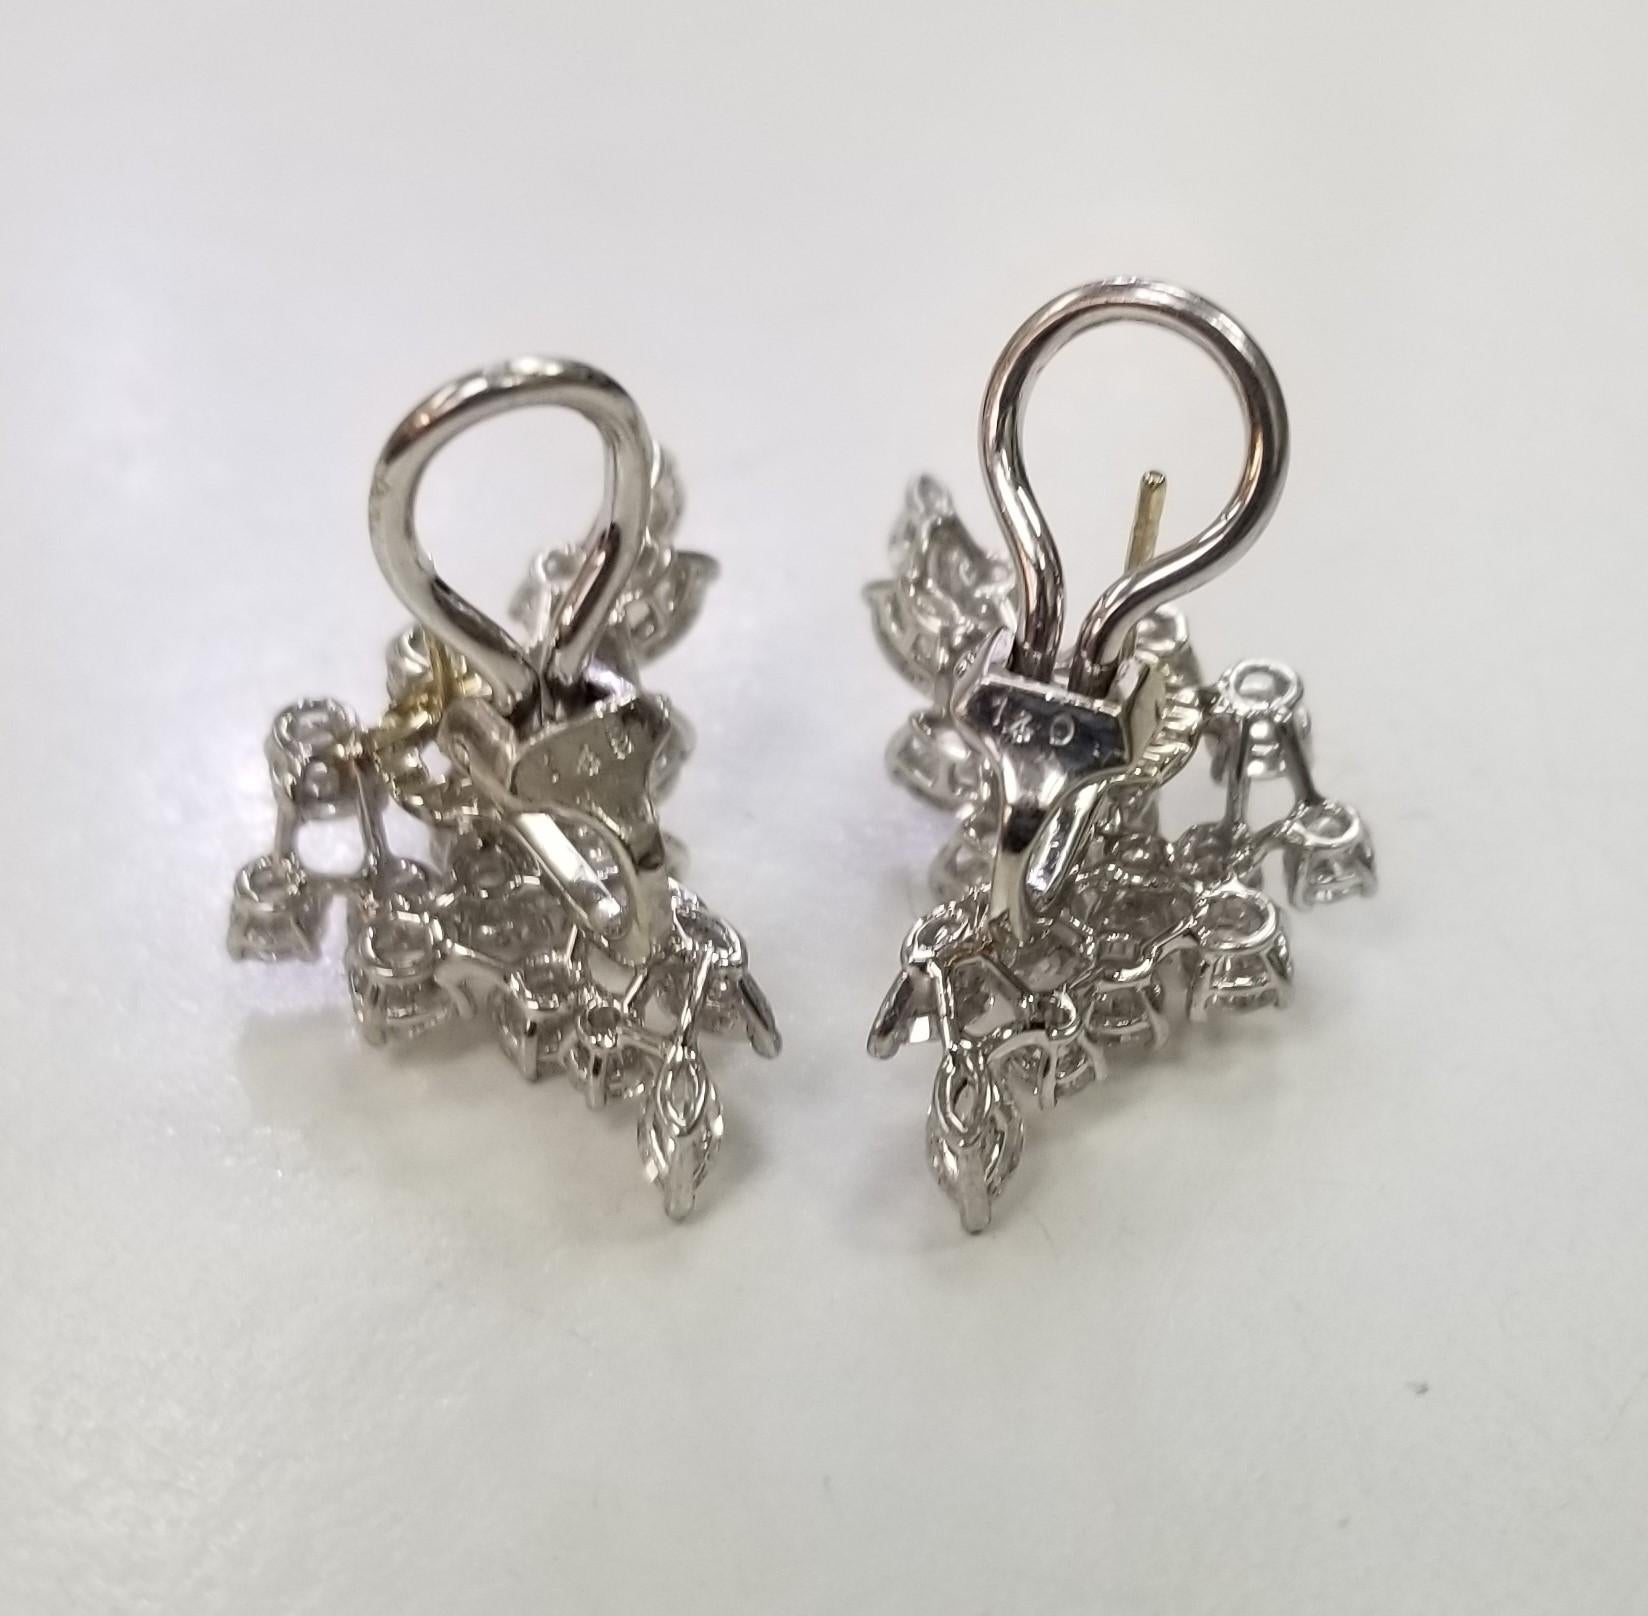 This is a Platinum vintage art deco style pair of diamond Earrings.  There are approximately 4.02 carat total weight of white brilliant diamonds in the flower design. The diamonds, made up of round and marquise cuts are appraised as F-G color and